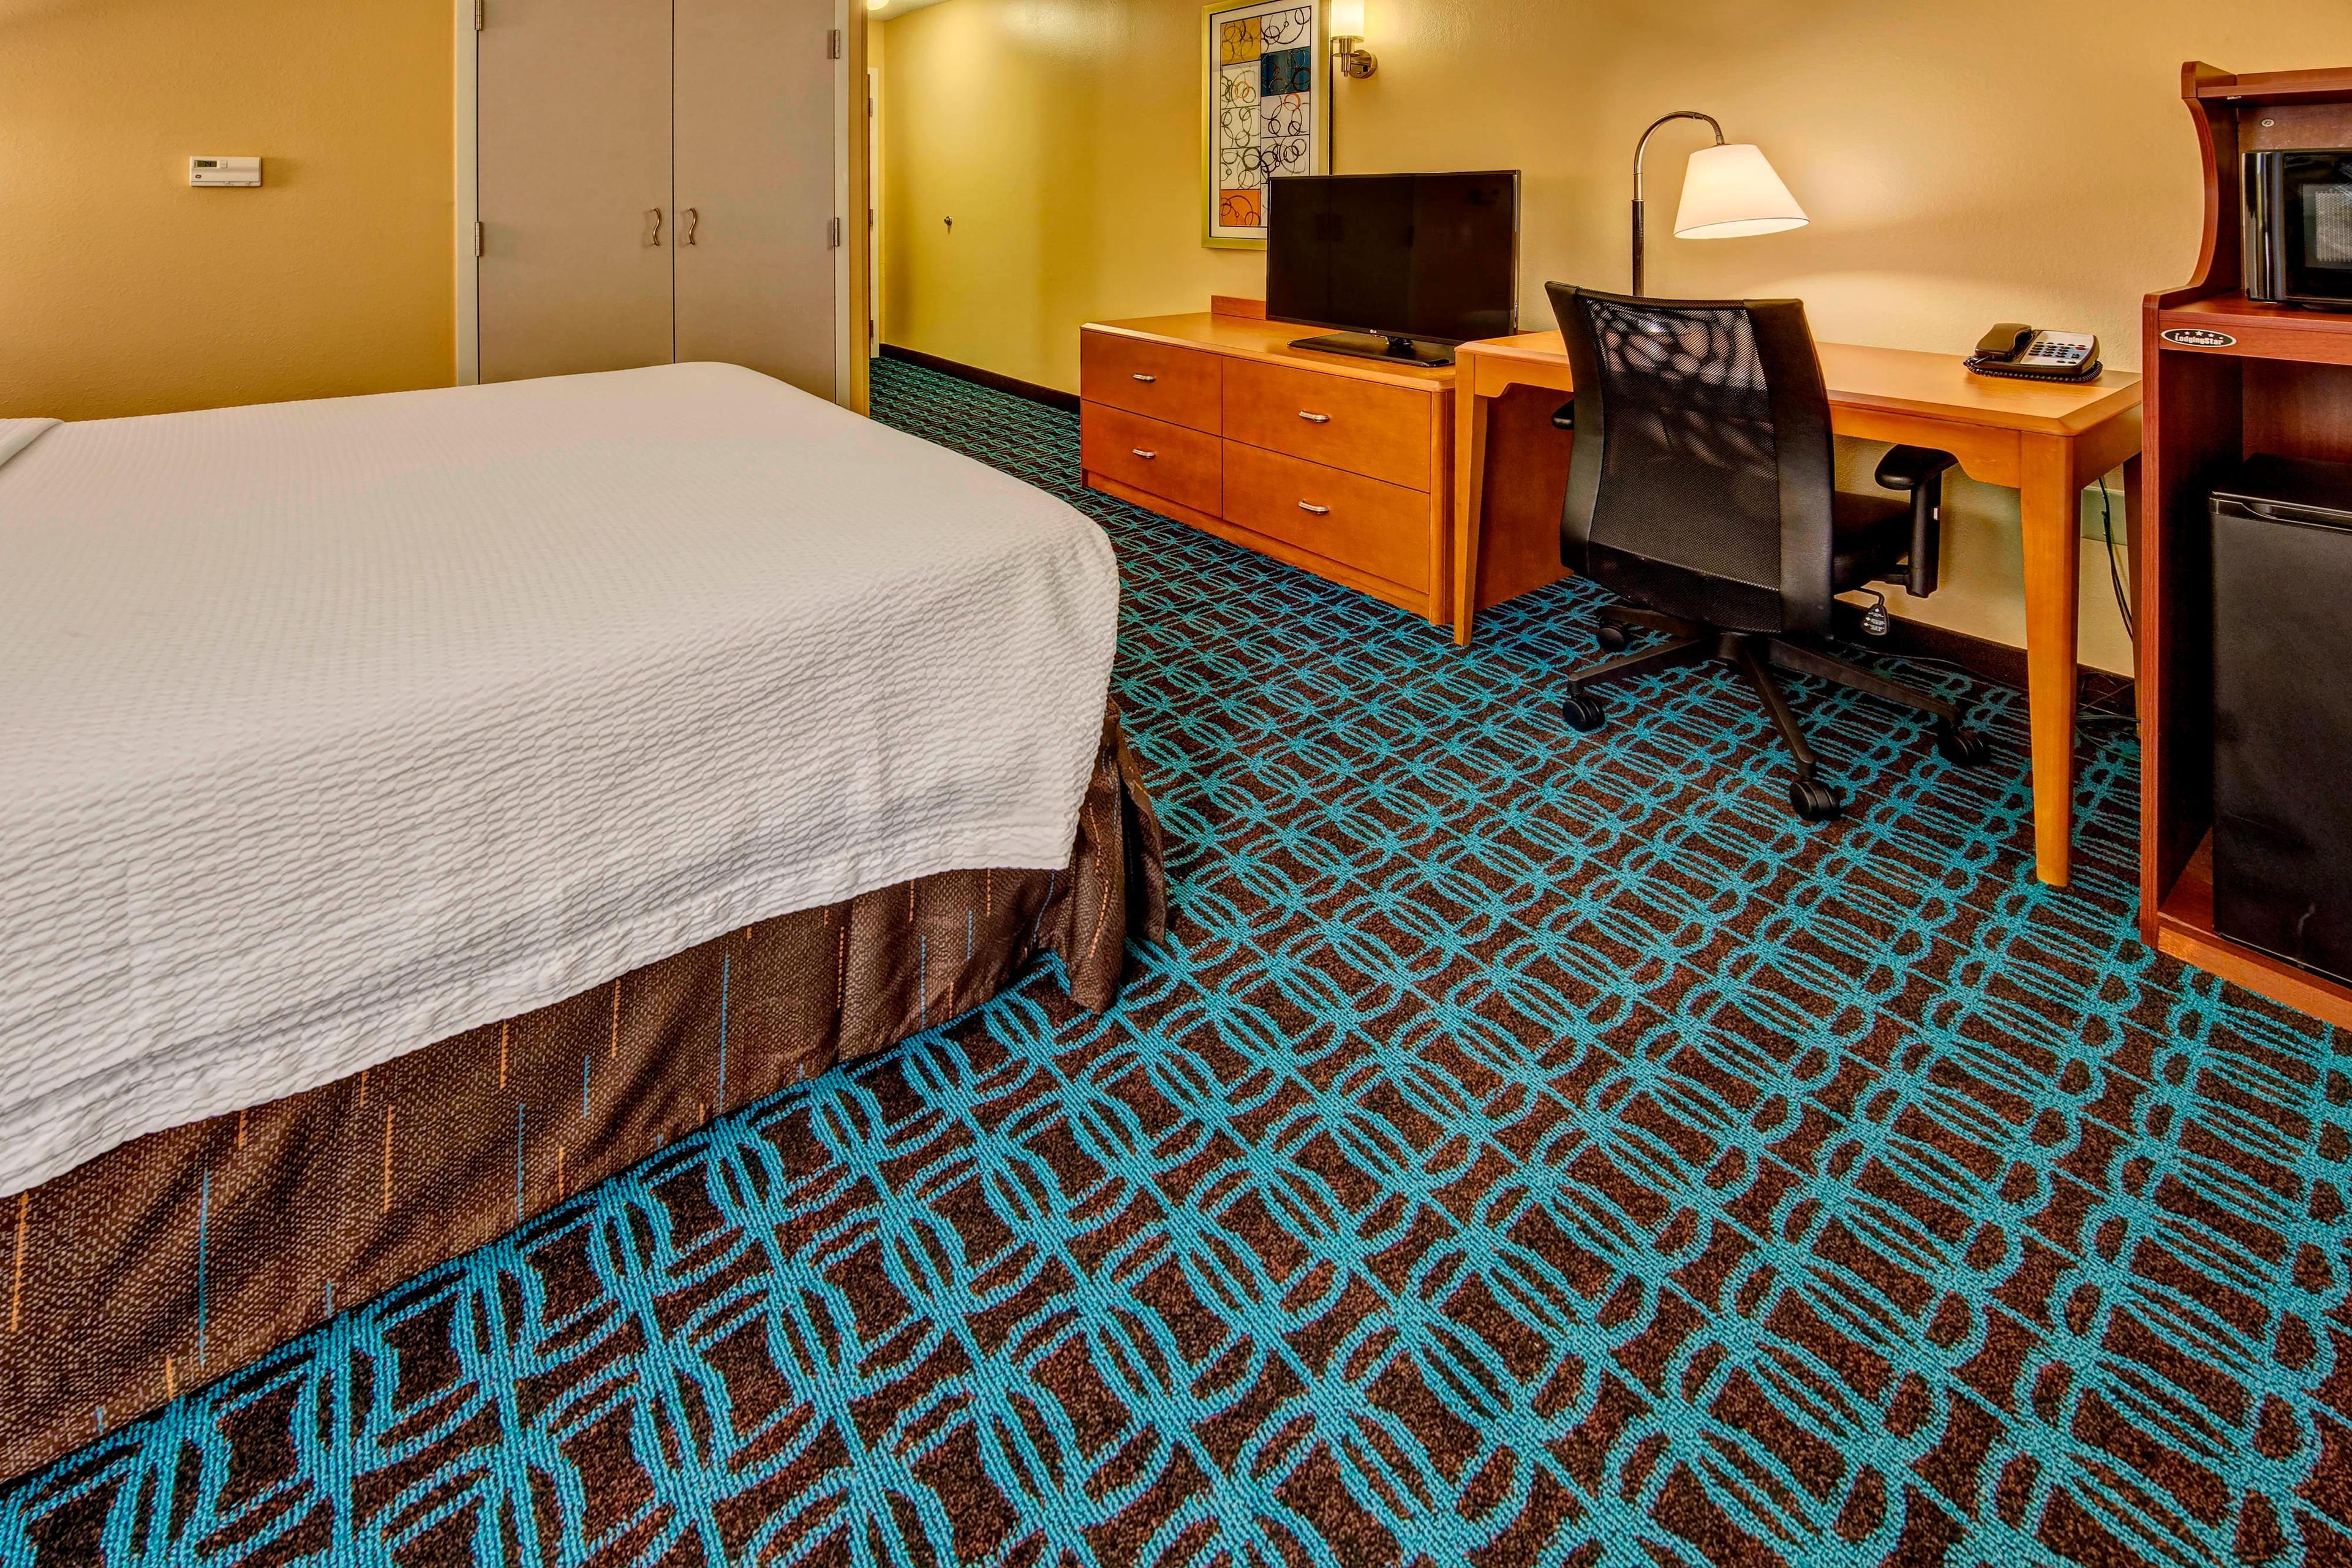 The king guest room features a 40-inch Smart TV, microwave and refrigerator. There is plenty of room to work at the desk with an ergonomic chair for comfort.